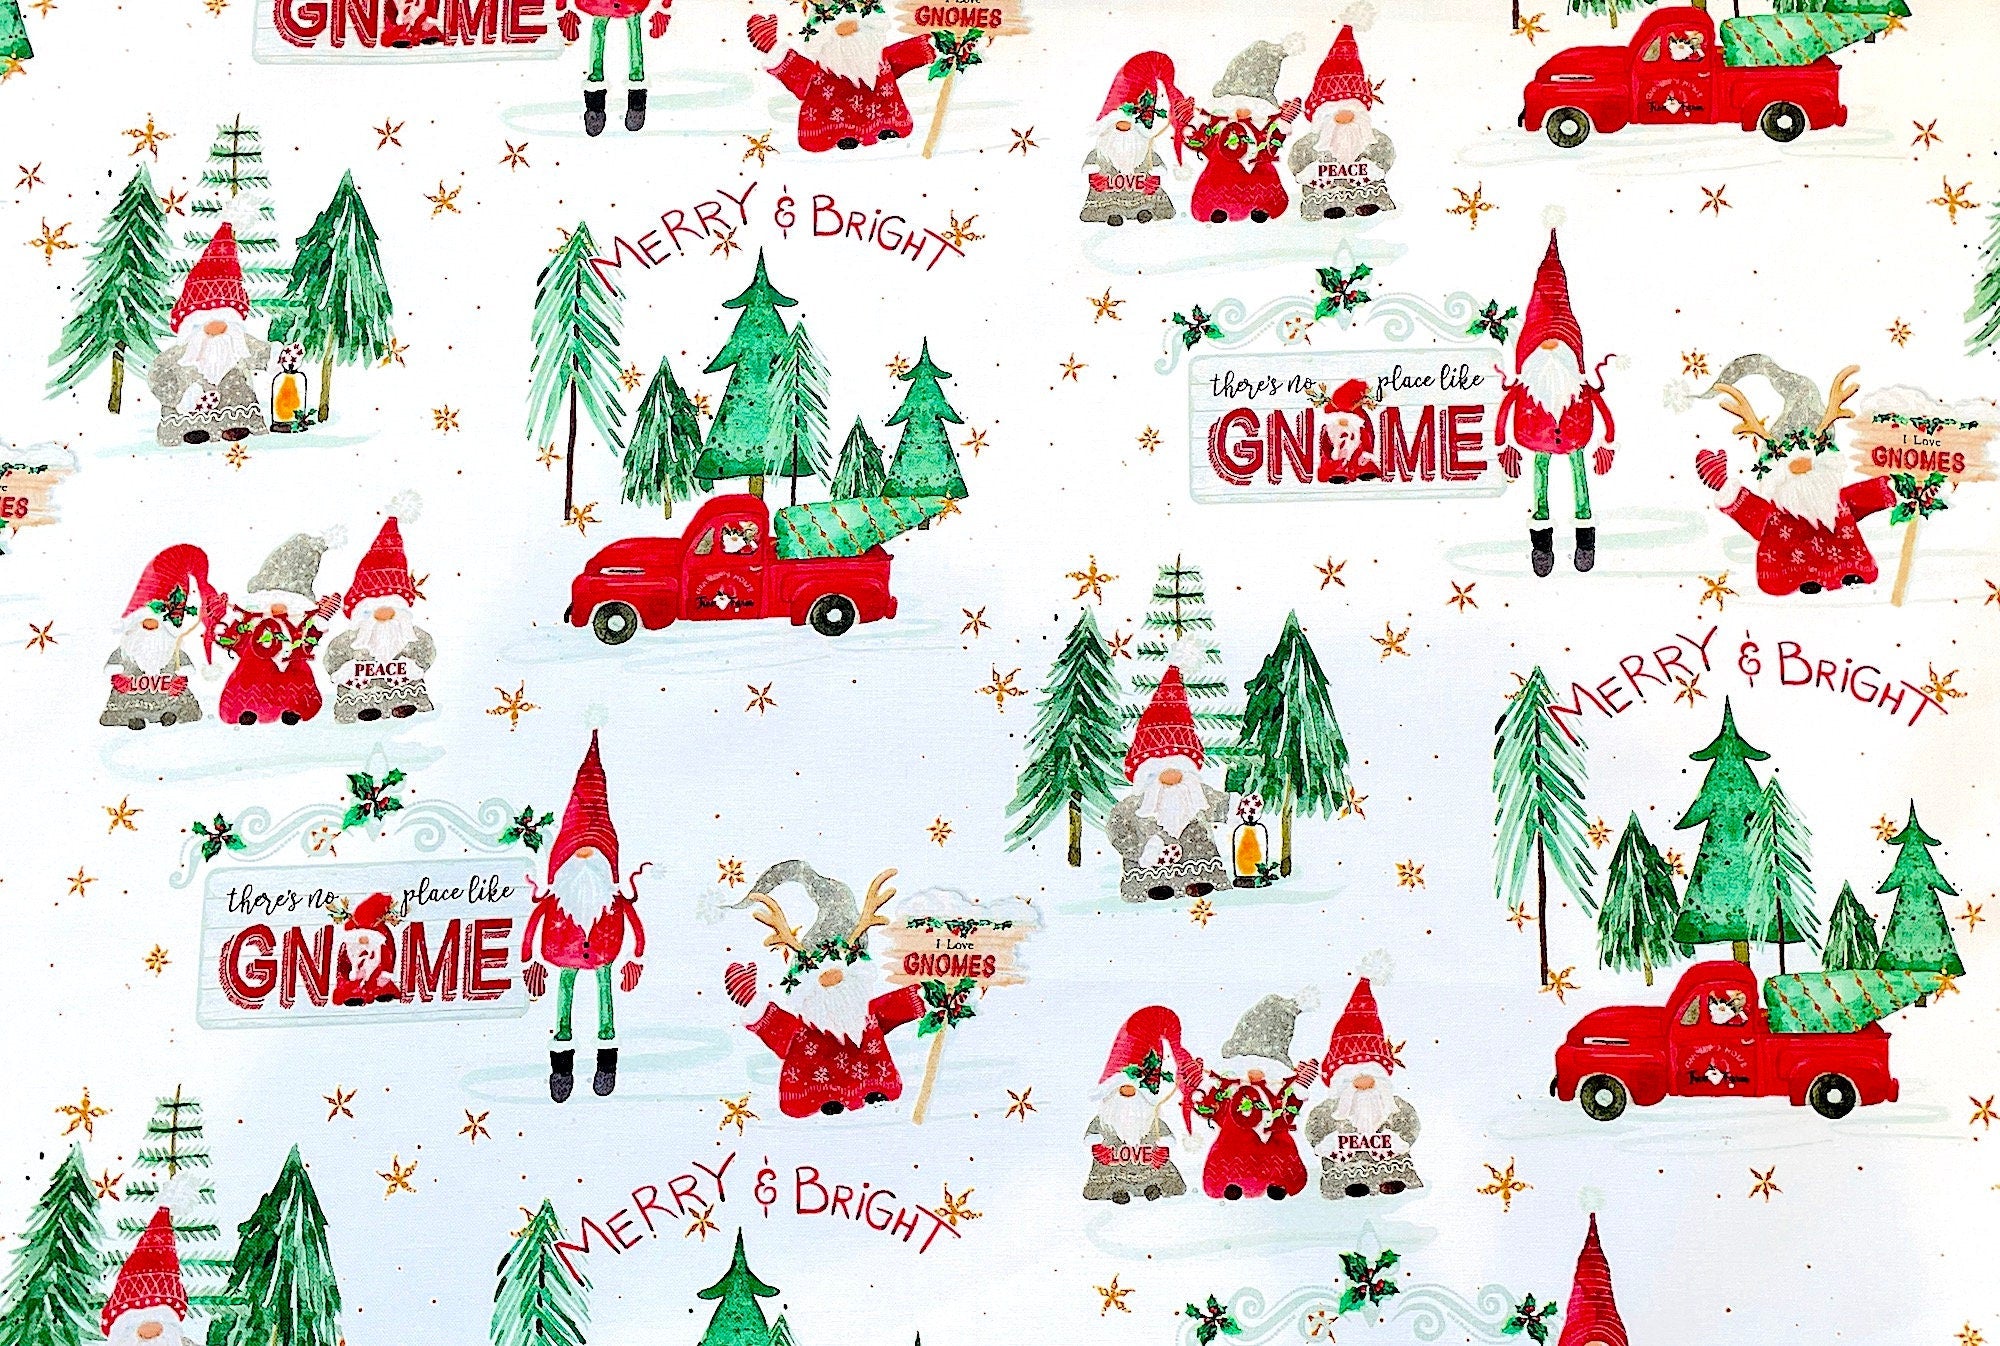 White cotton fabric covered with red trucks, green trees and gnomes.